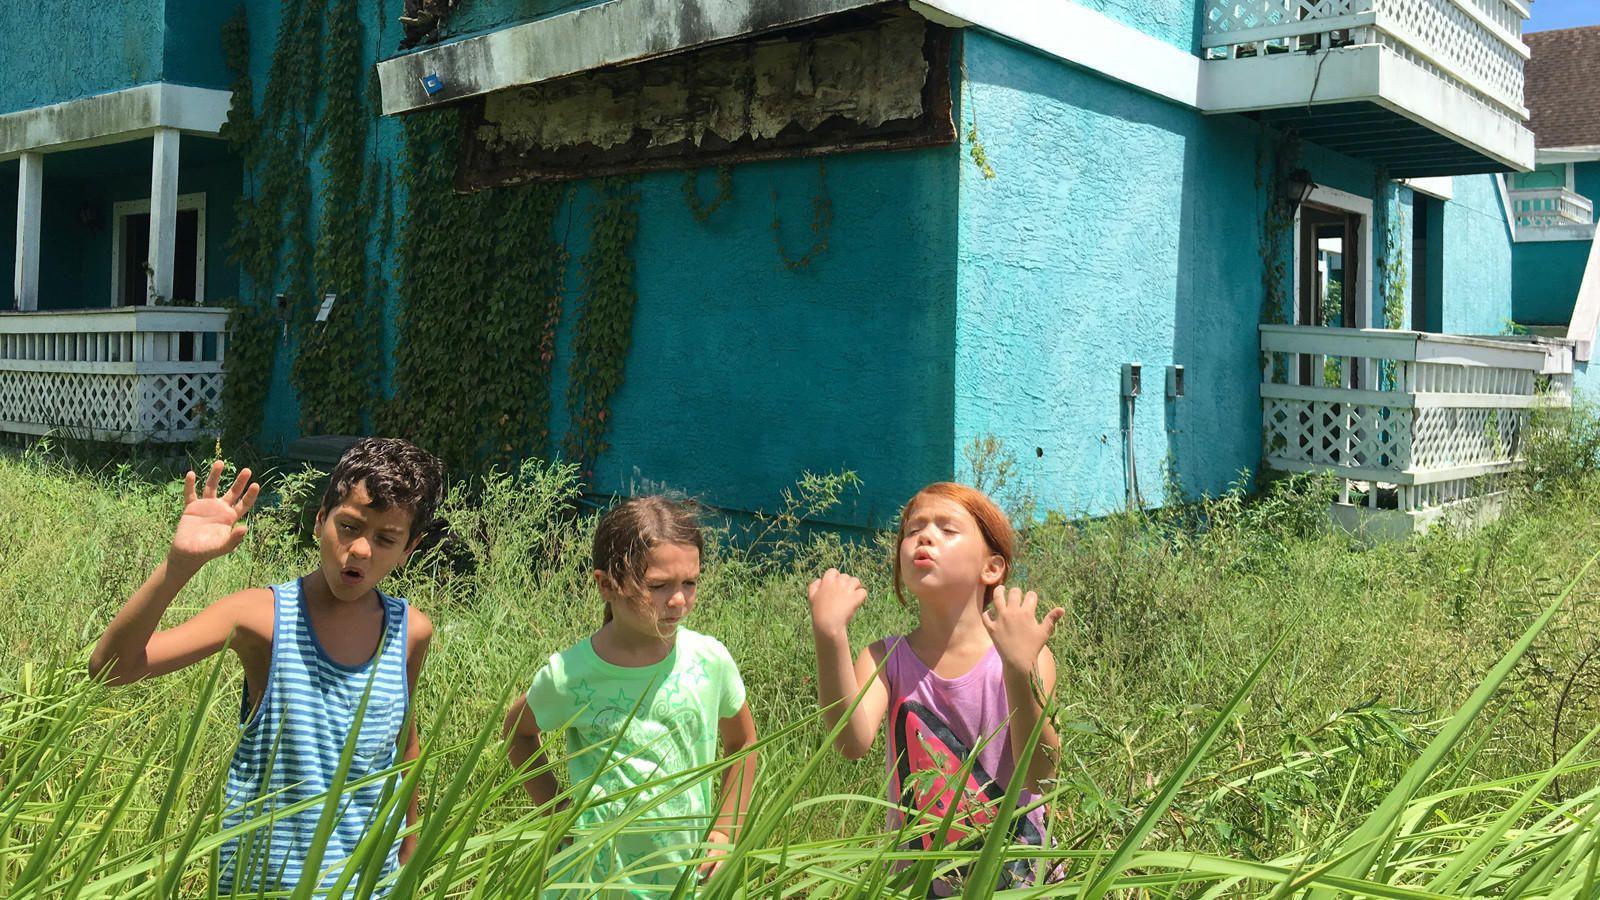 Sean Baker's 'The Florida Project' is a magnificent portrait of a